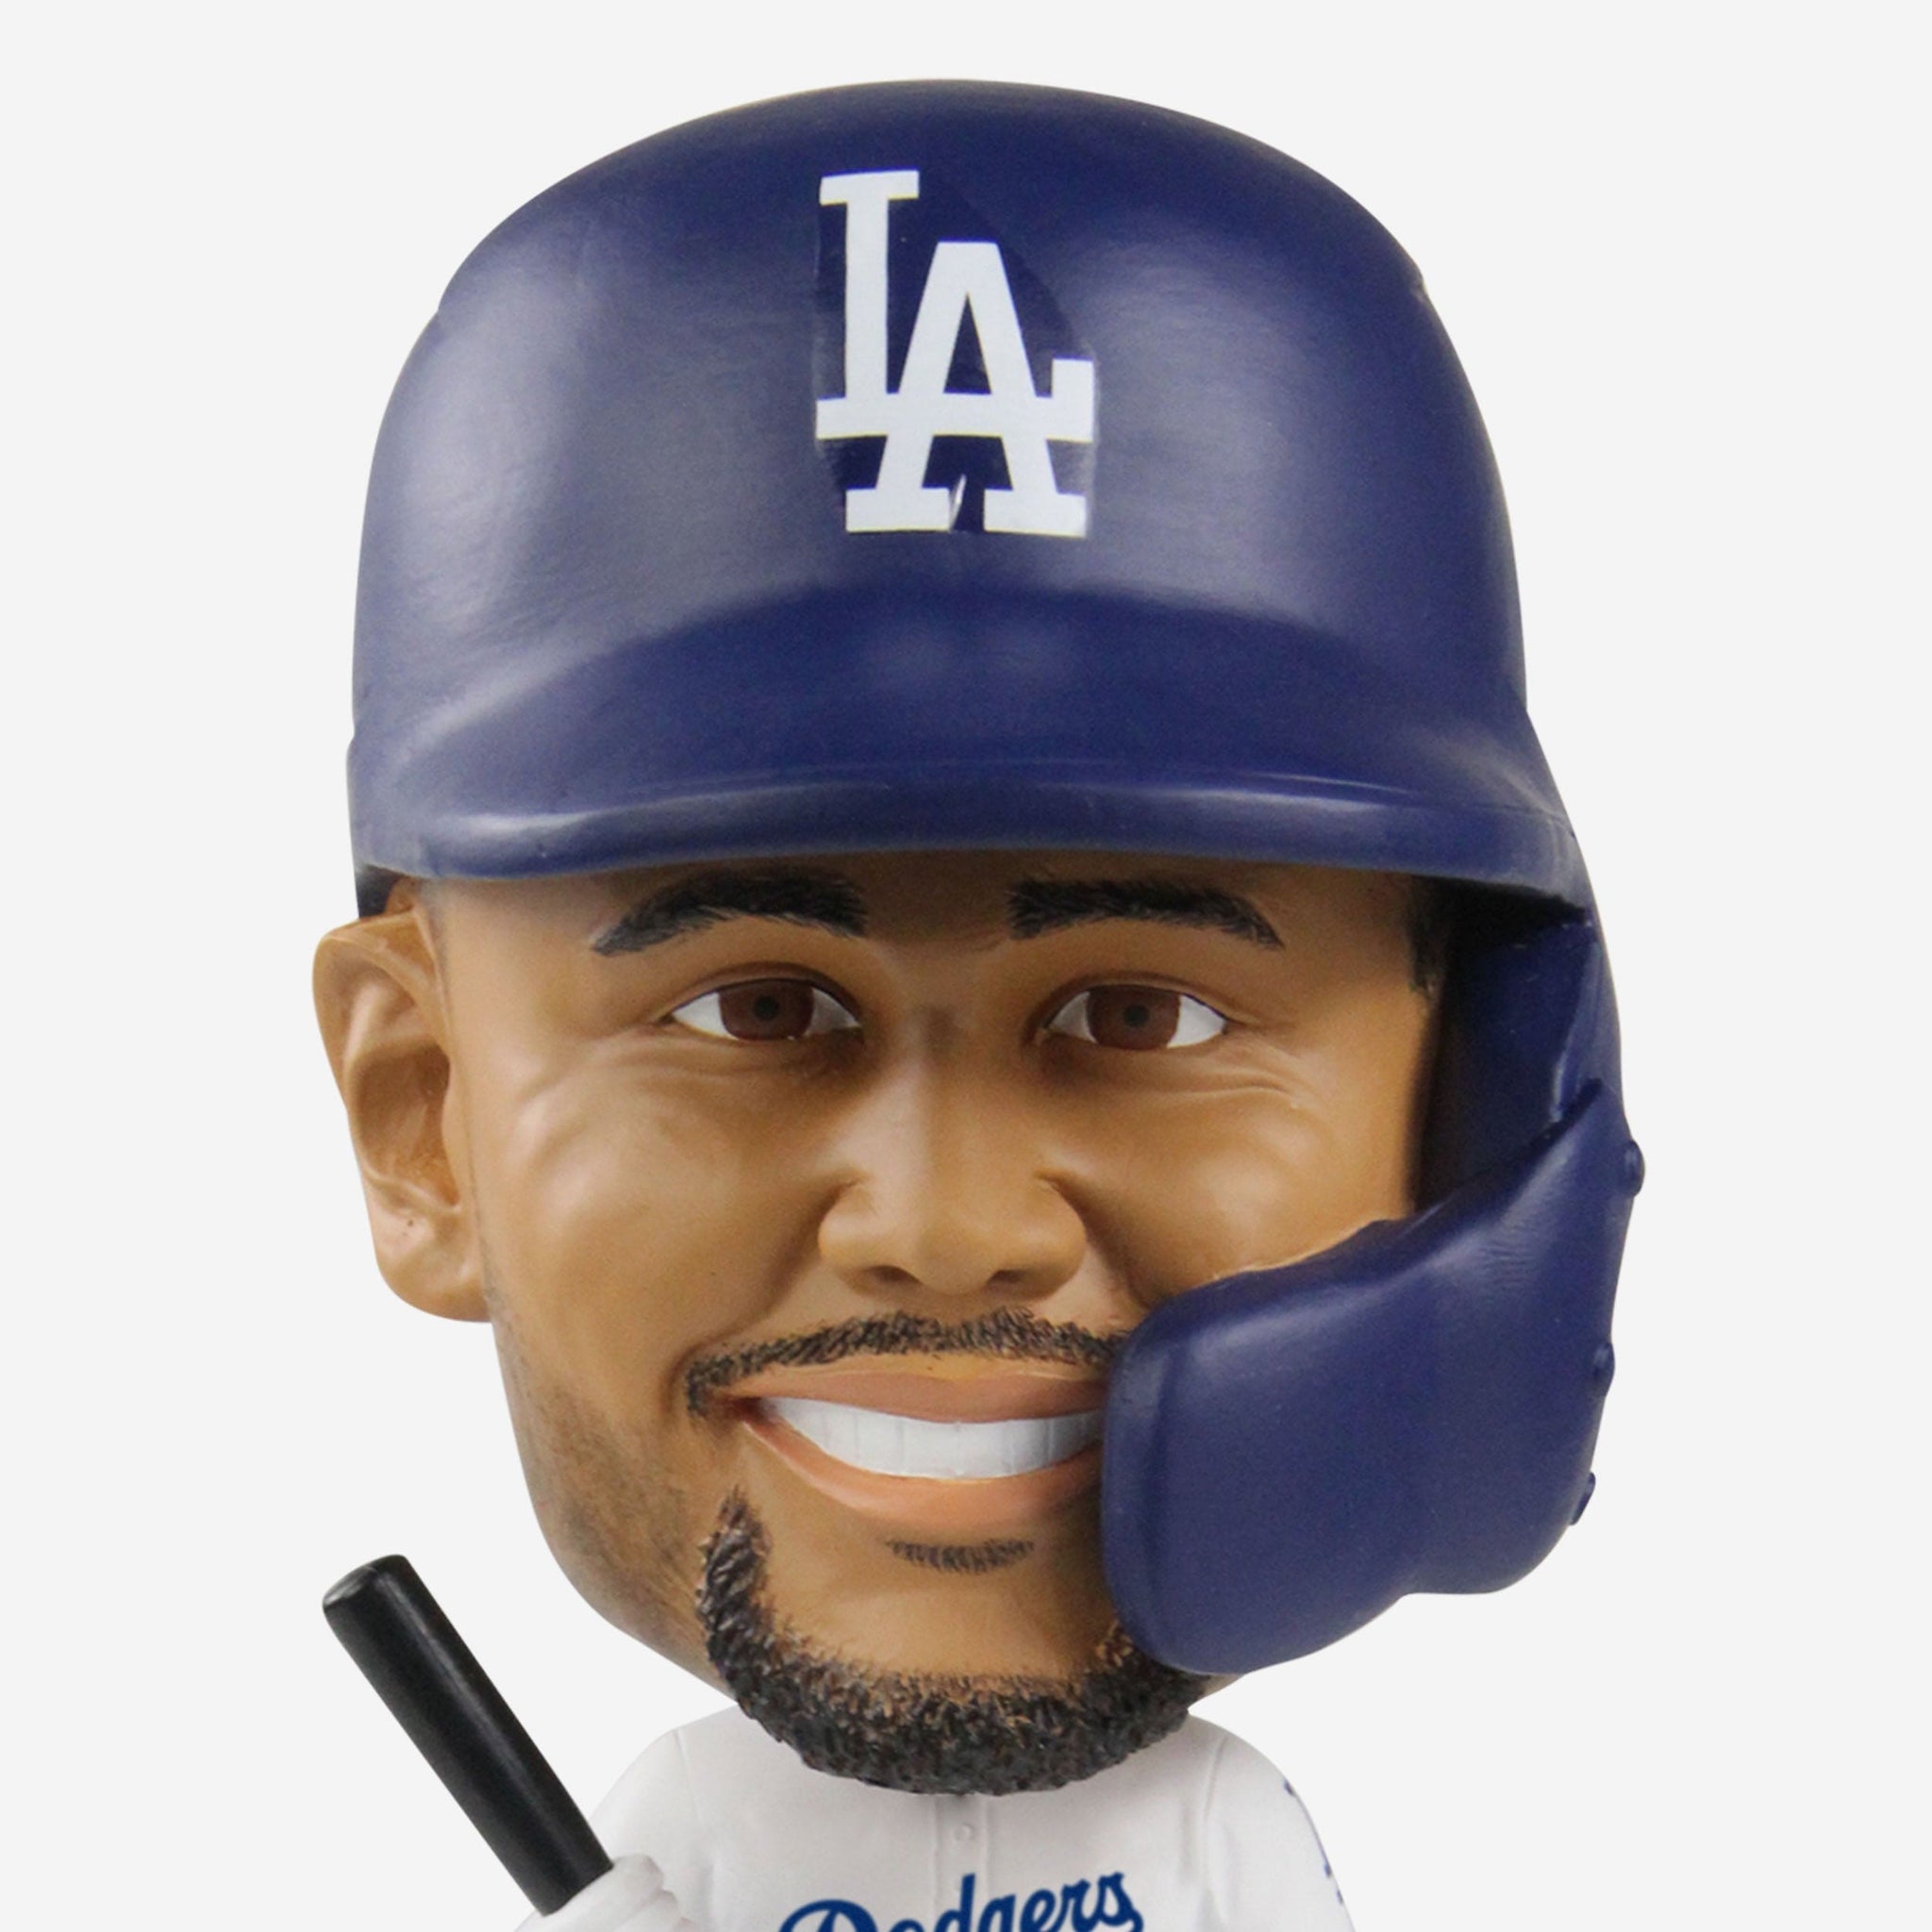 FOCO Selling 1988 Dodgers World Series Bobbleheads Of Tommy